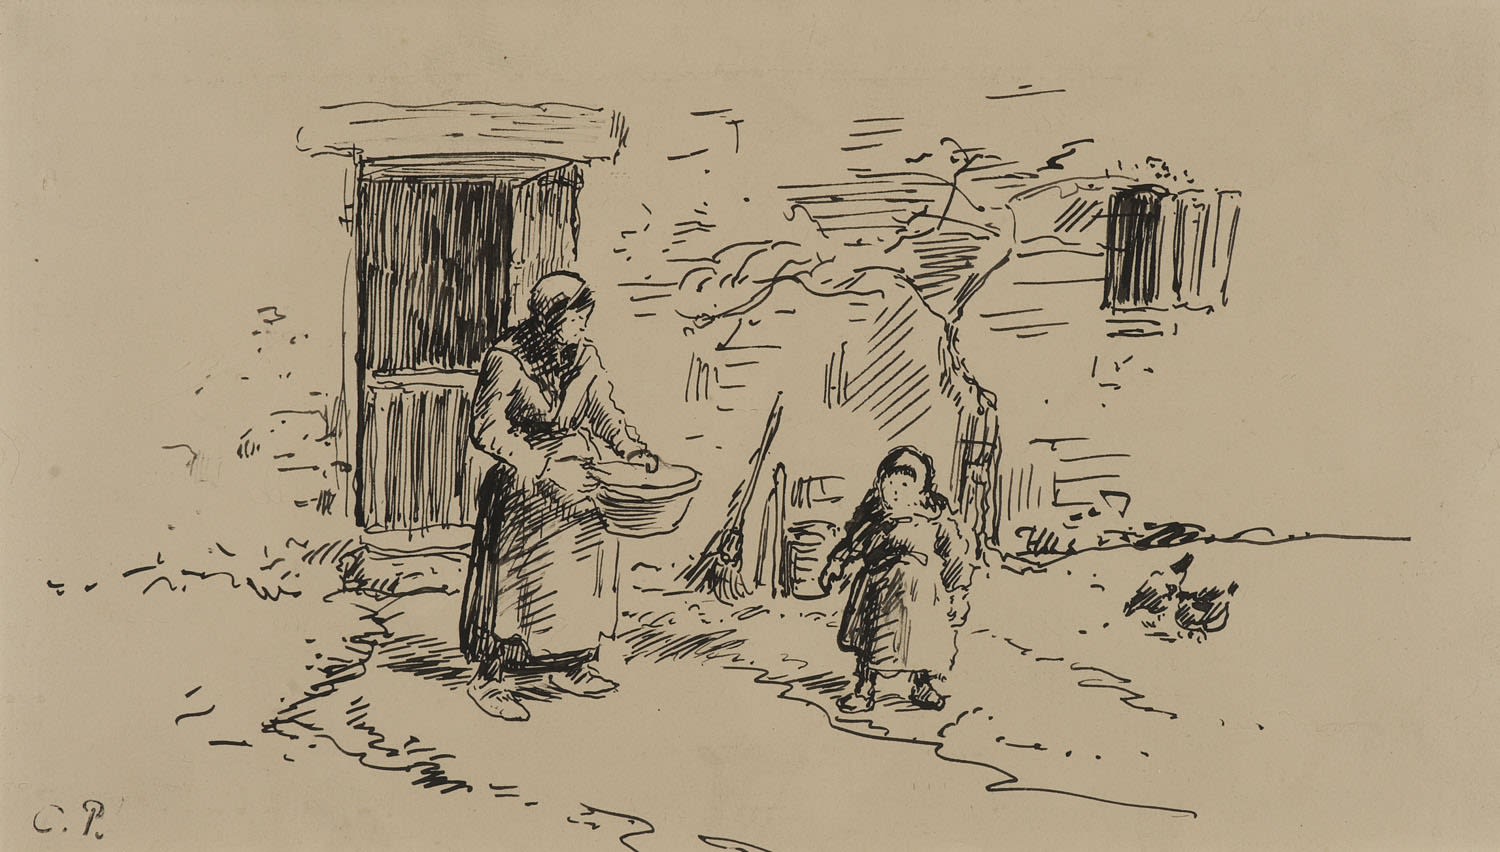 Camille Pissarro (1830-1903) Scène de ferme (Farm Scene) n.d. Pen and ink on paper 11.1 × 20 cm Ben Uri Collection To see and discover more about this artist click here